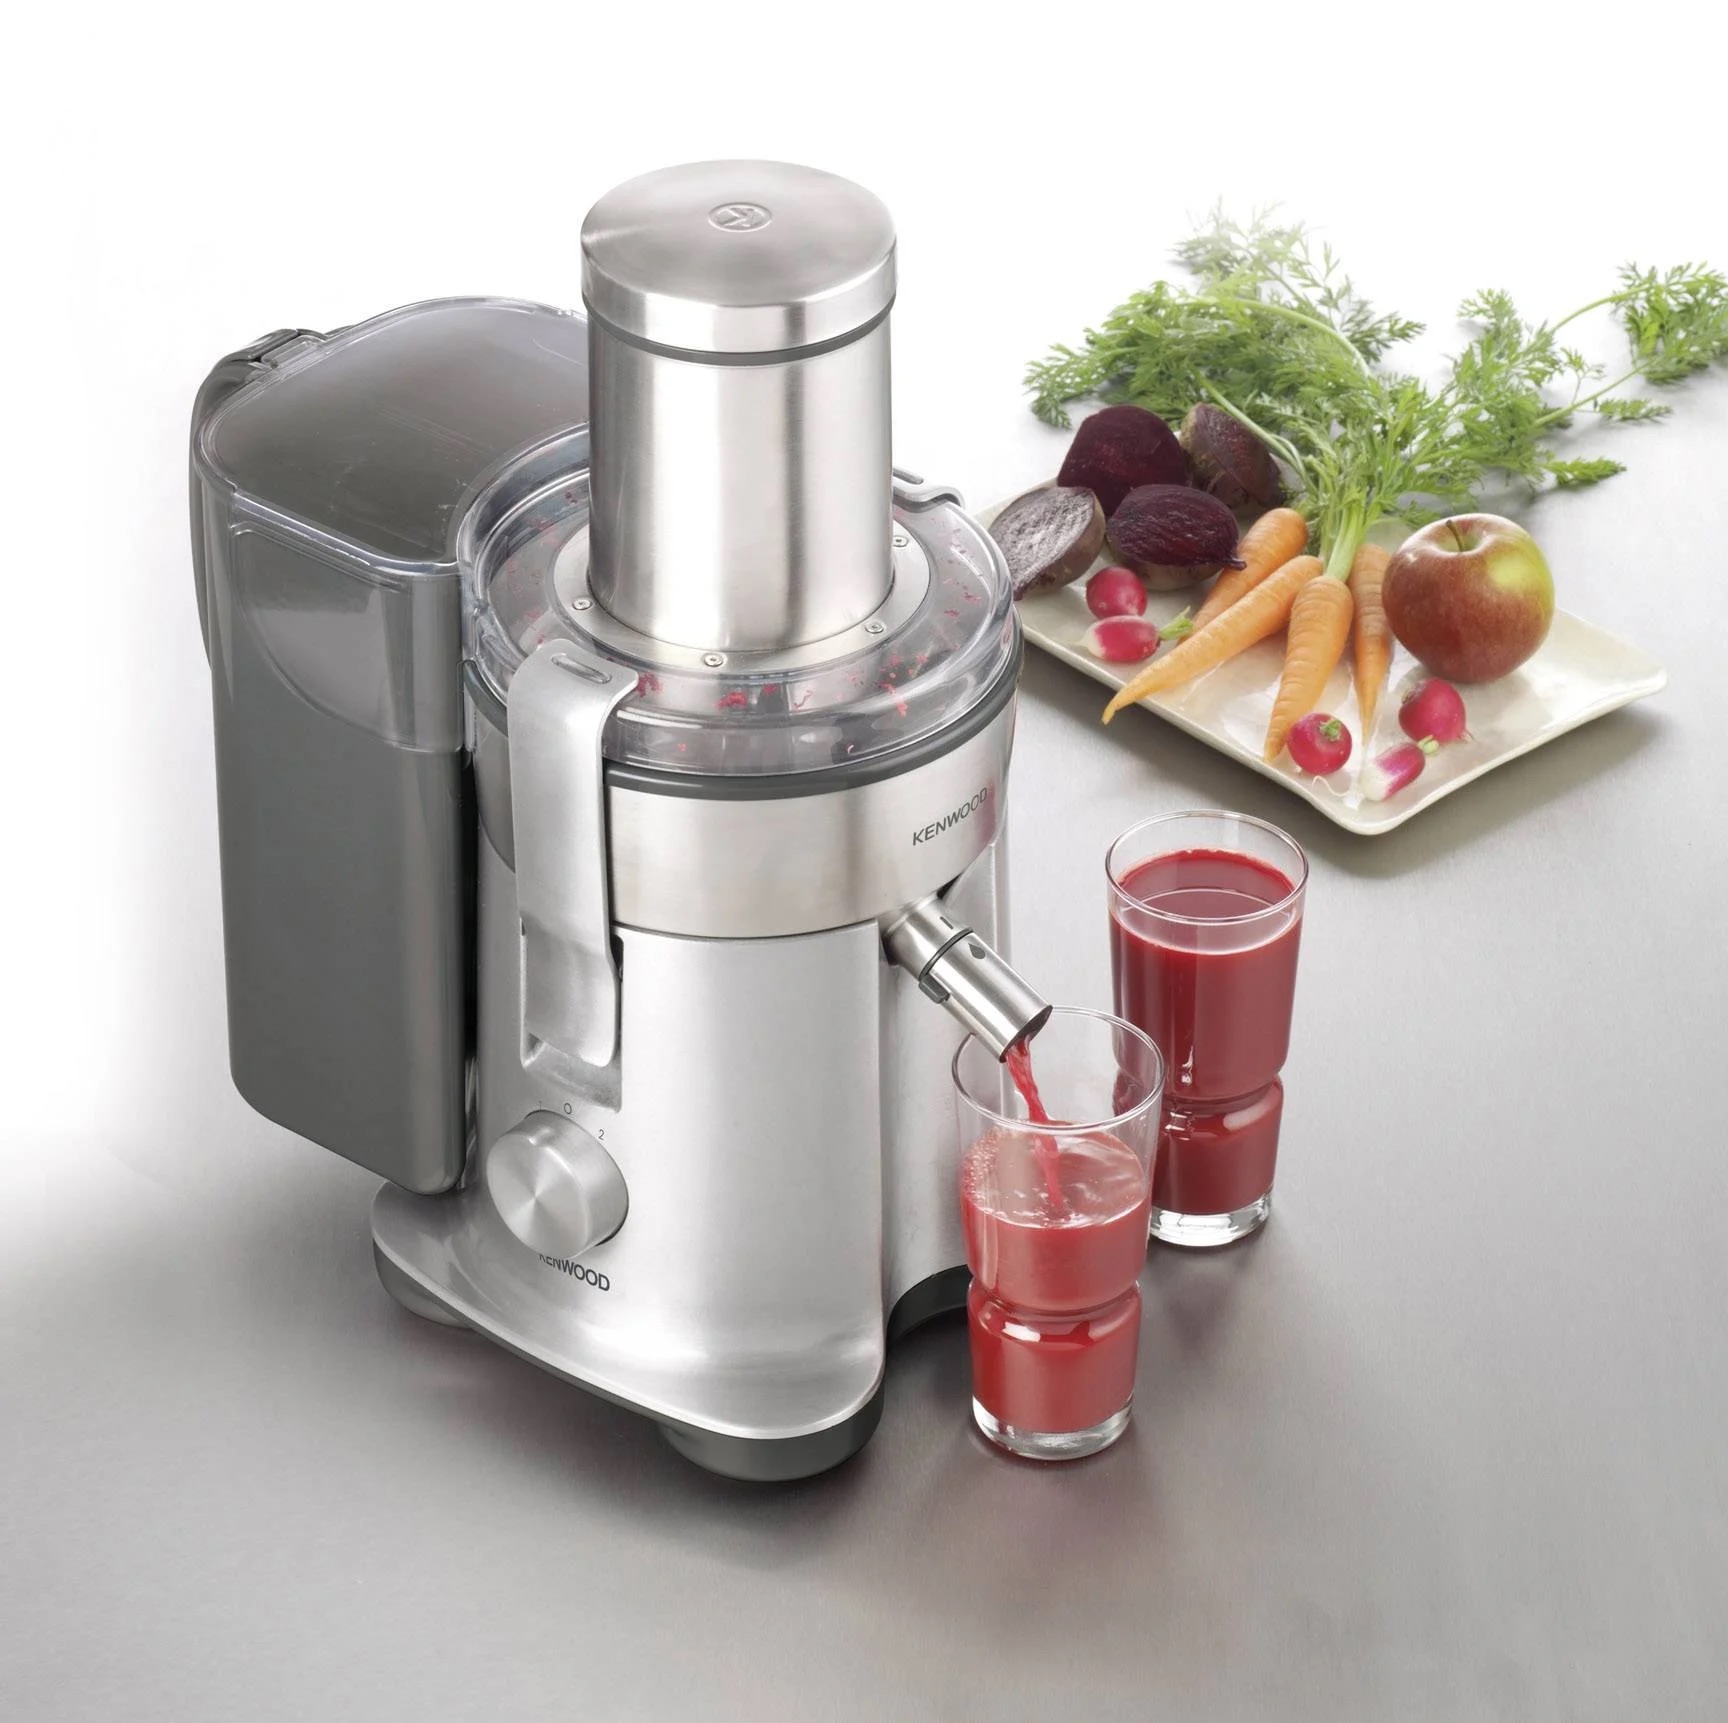 What Is A Good Wattage For A Juicer